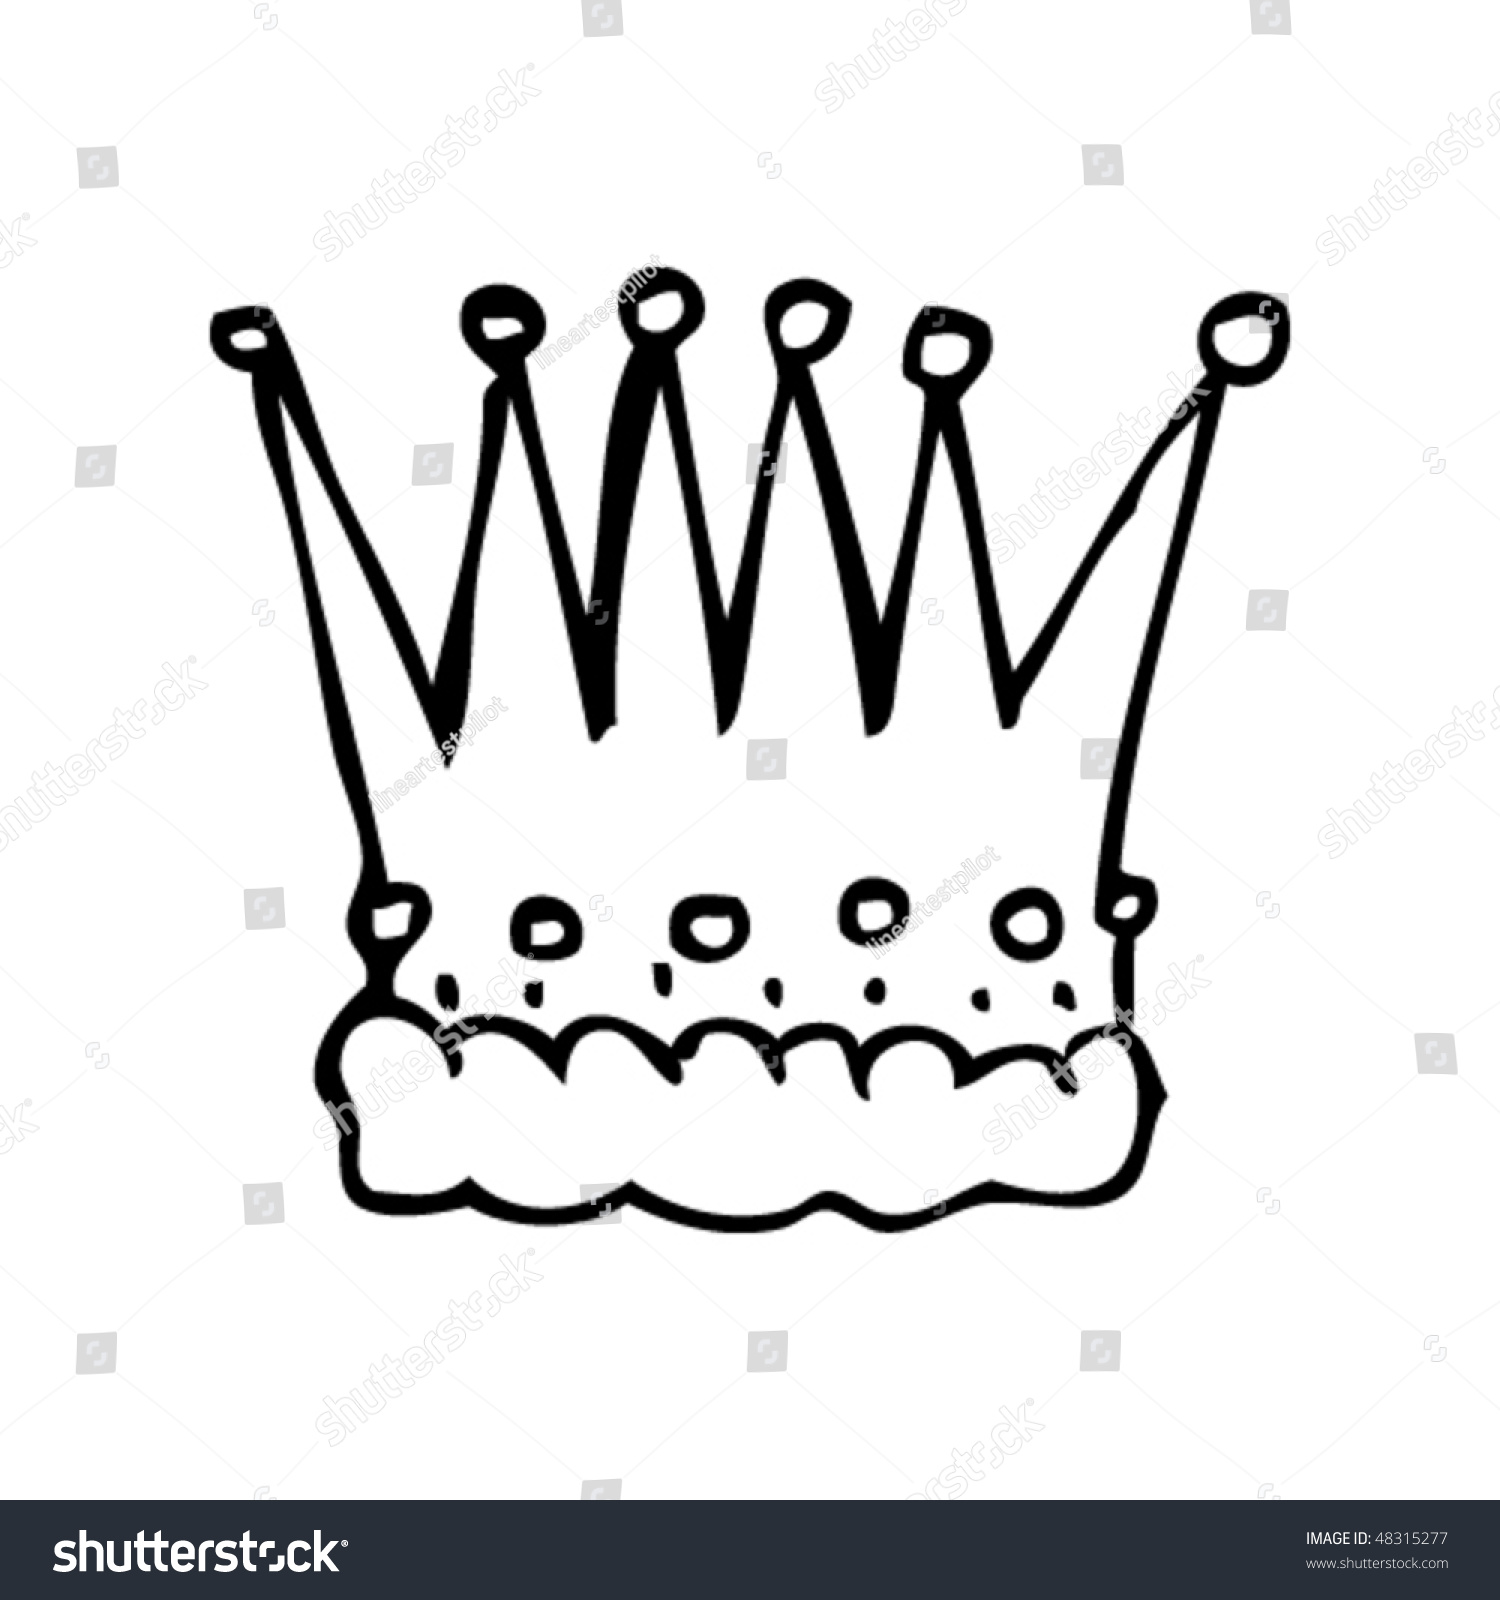 Drawing Of A Crown Stock Vector Illustration 48315277 : Shutterstock